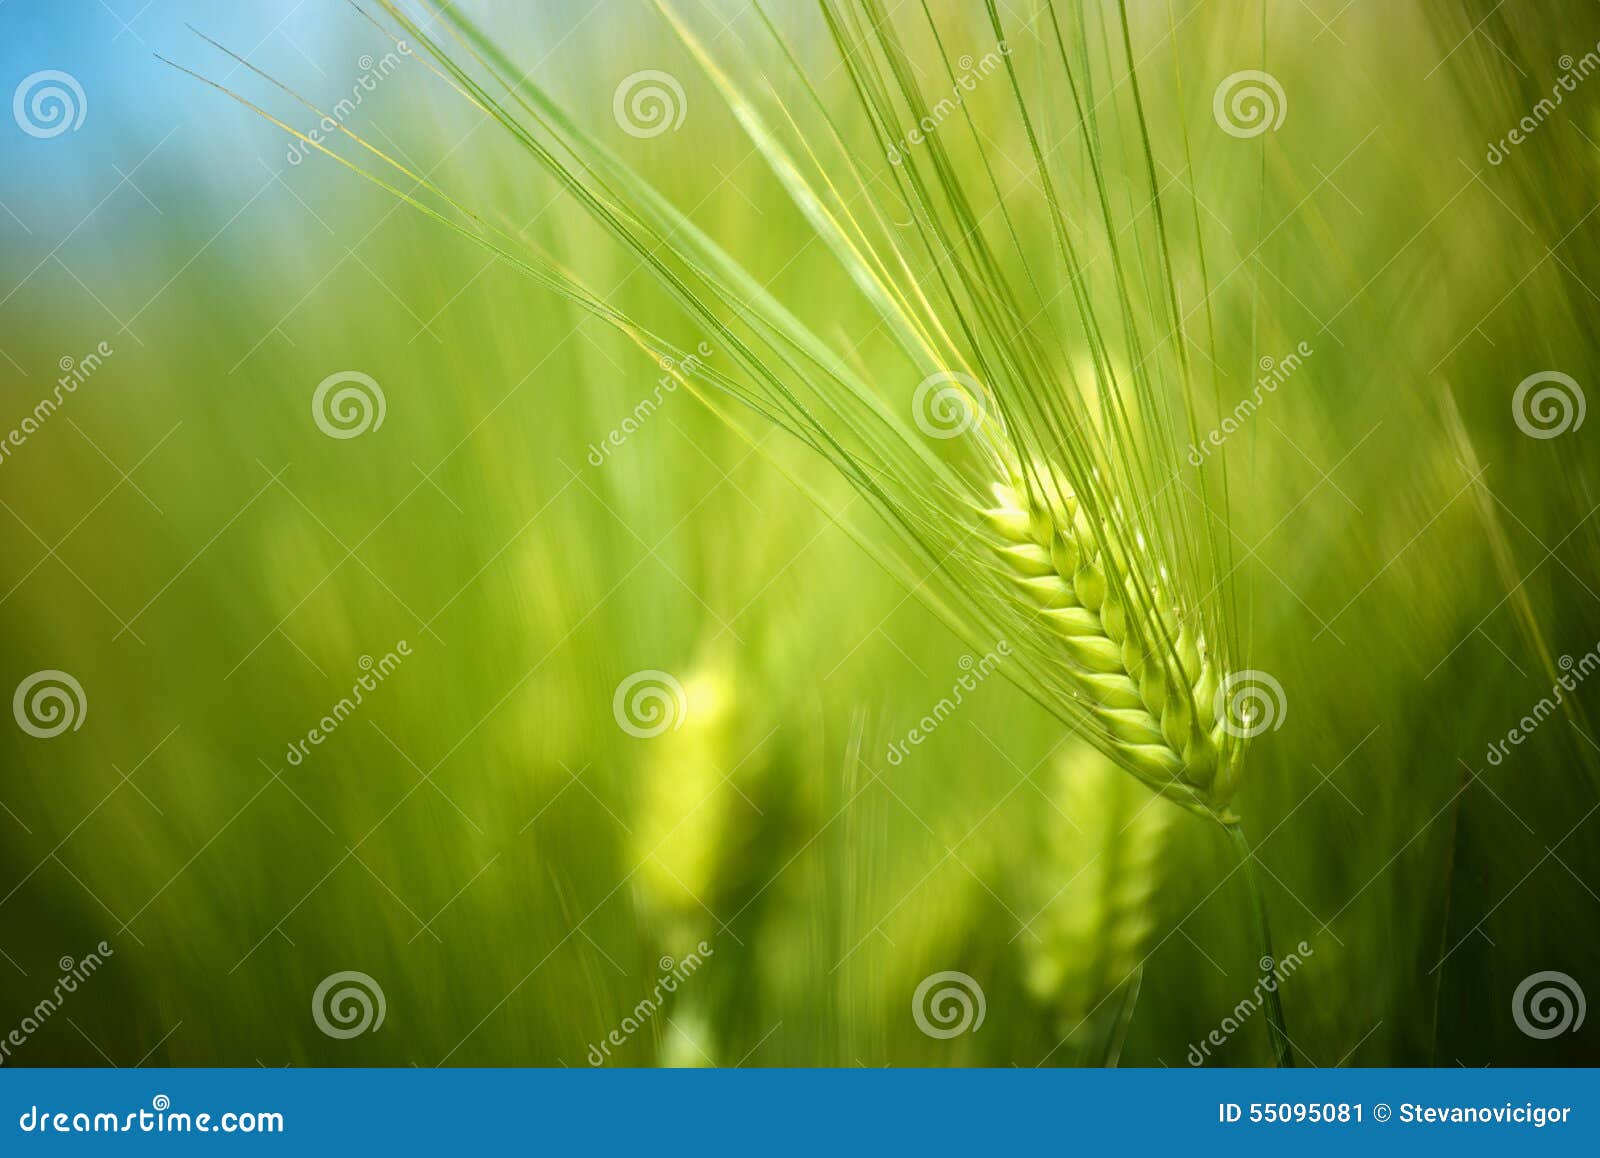 young green wheat crops field growing in cultivated plantation